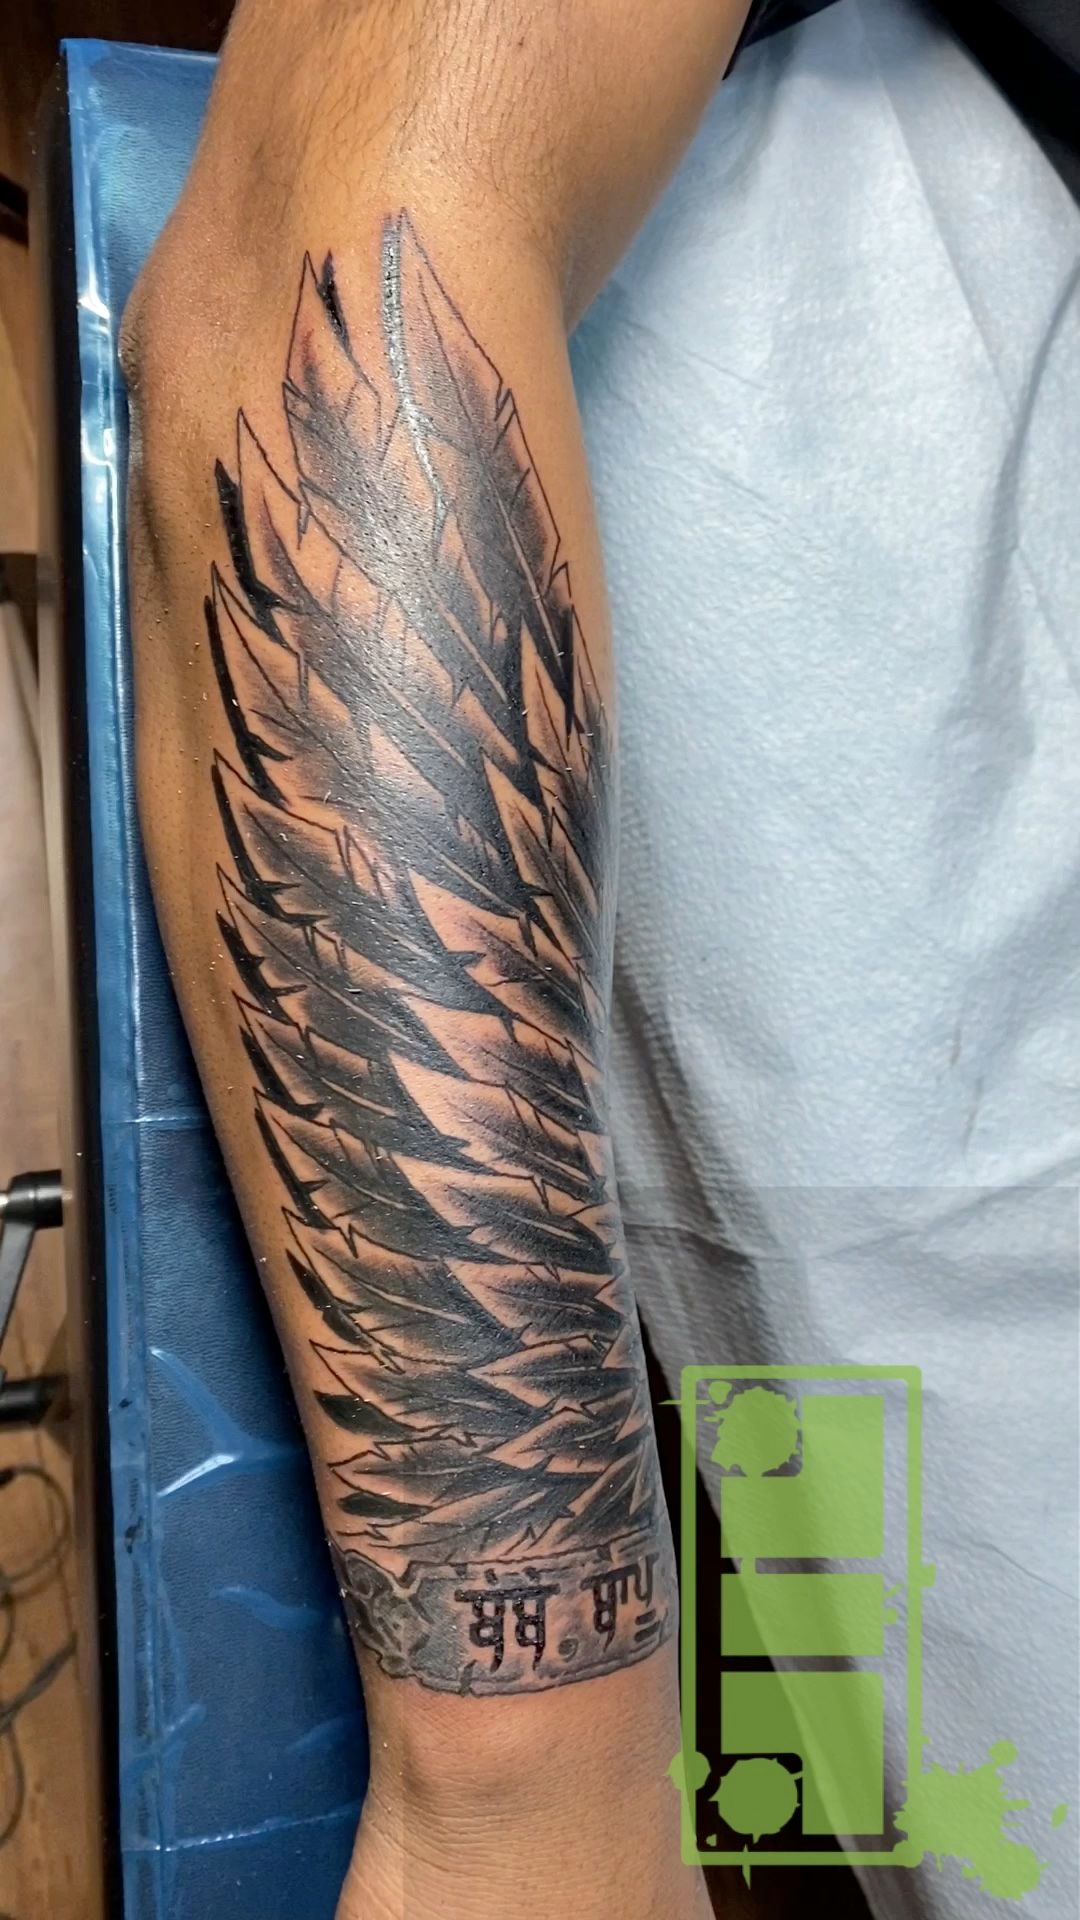 EAGLE FEATHERS… FOR TATTOO BOOKINGS AND INFO TEXT 480.330.9864 #tattoo # tattoos #tattooed #tattooartist #tattooart #tattoolife… | Instagram